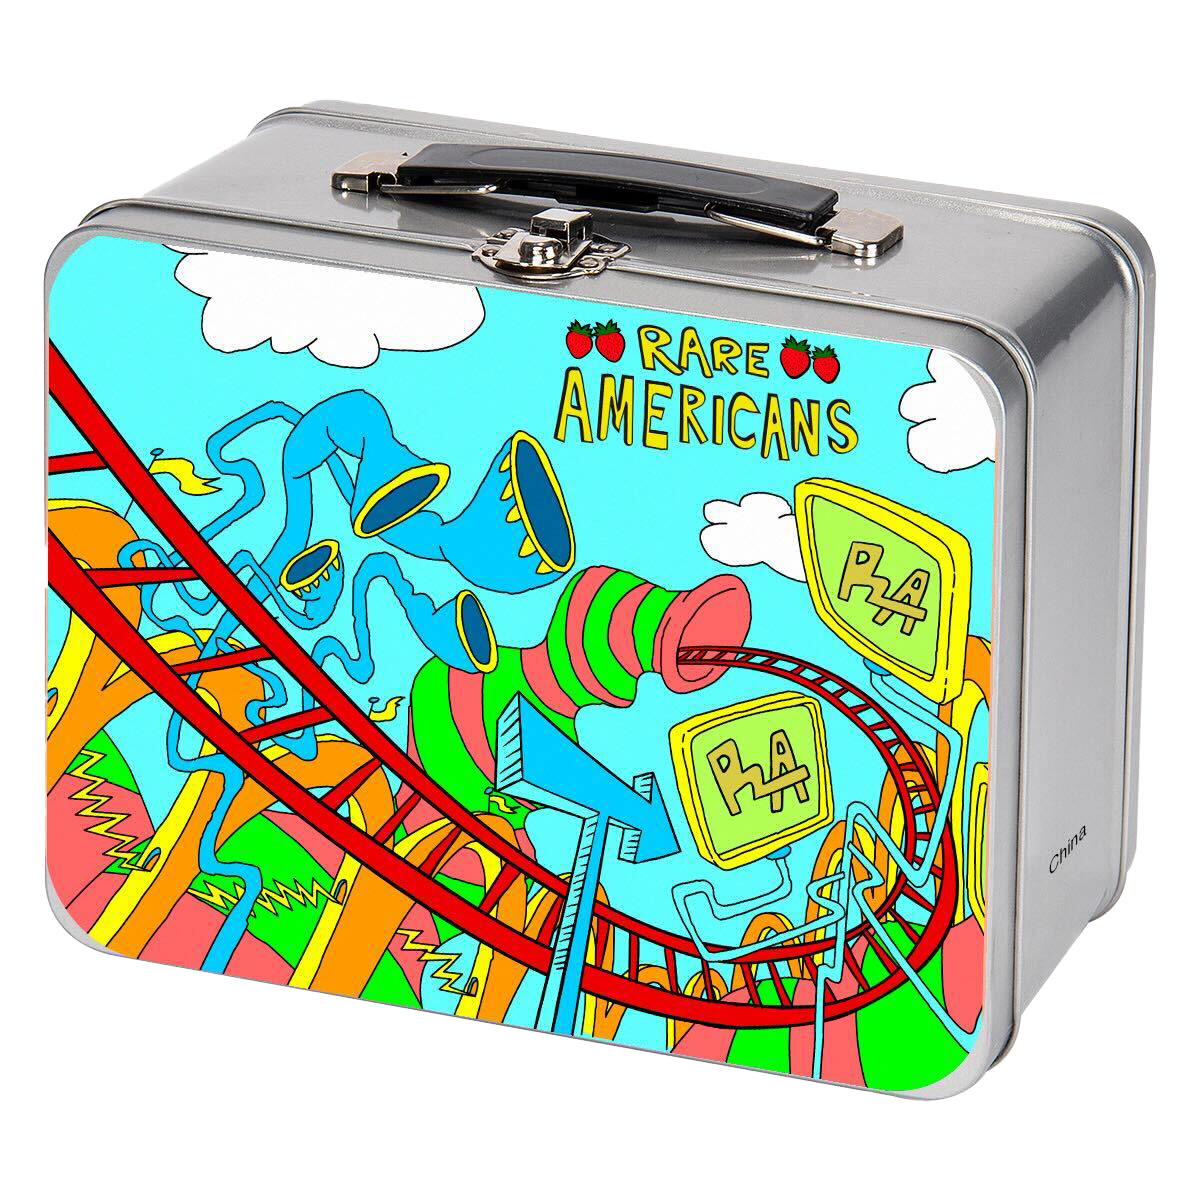 Searching for Strawberries Throwback Tin Lunchbox